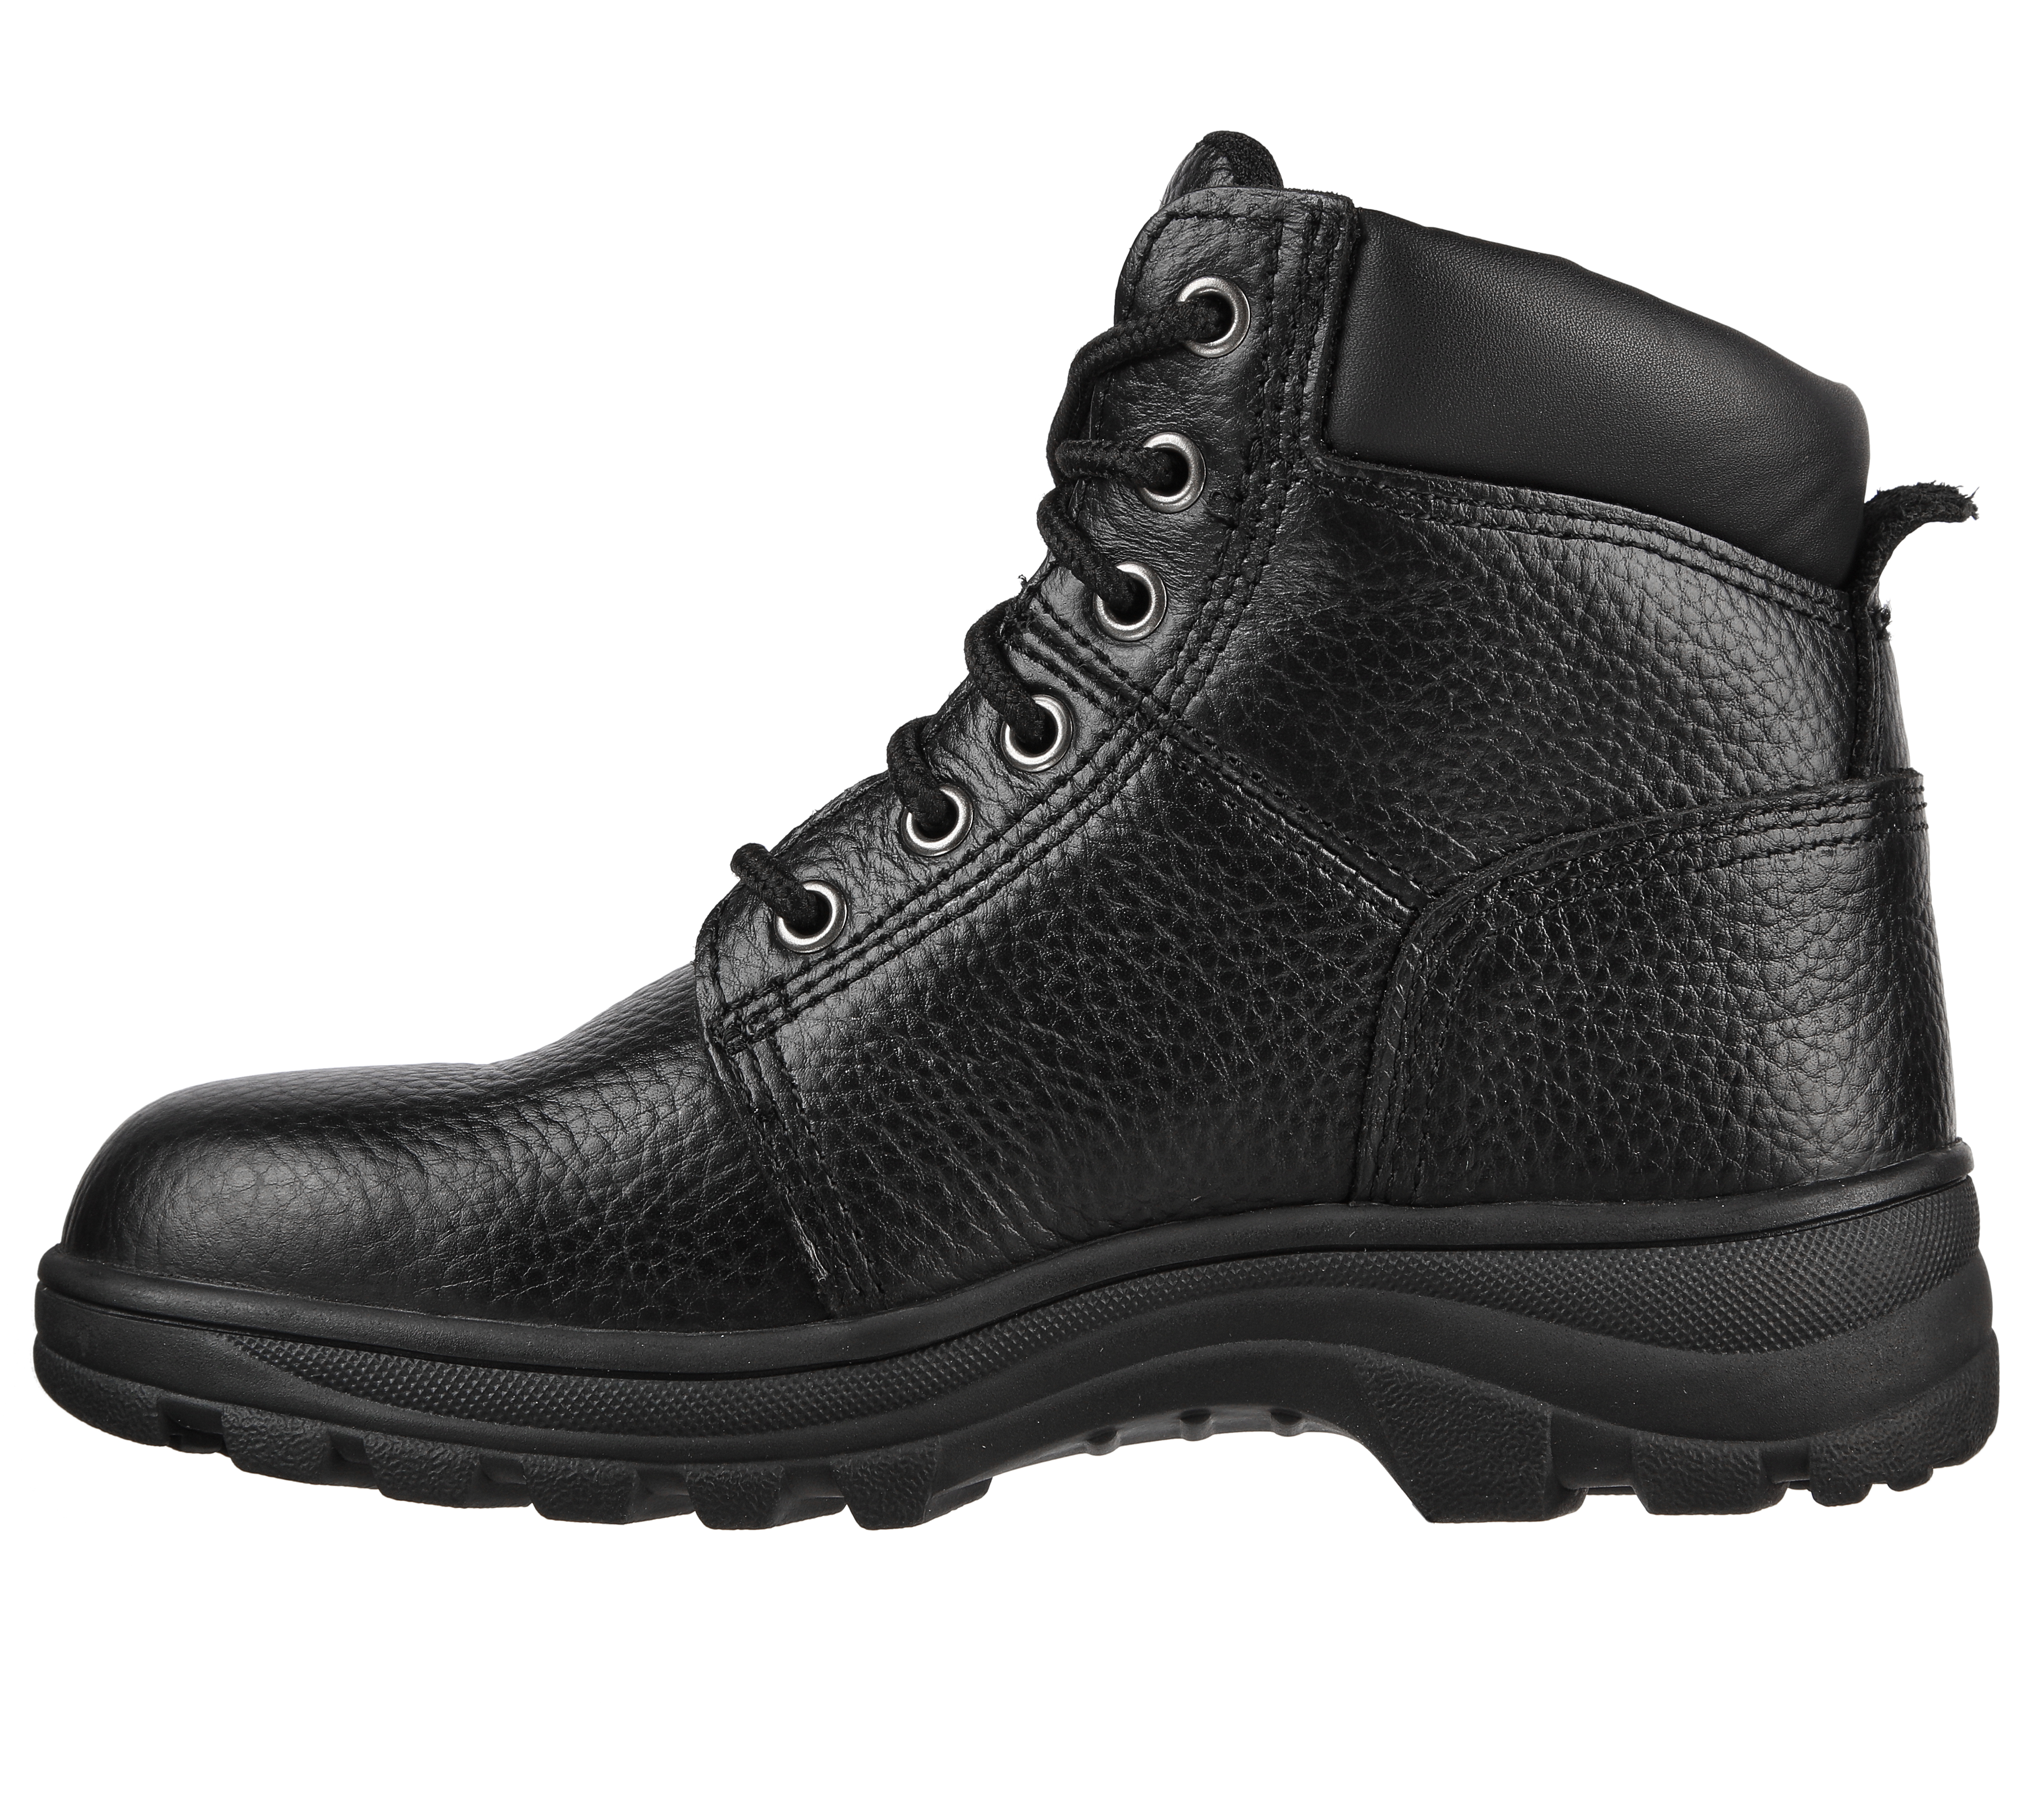 skechers work boots safety toe